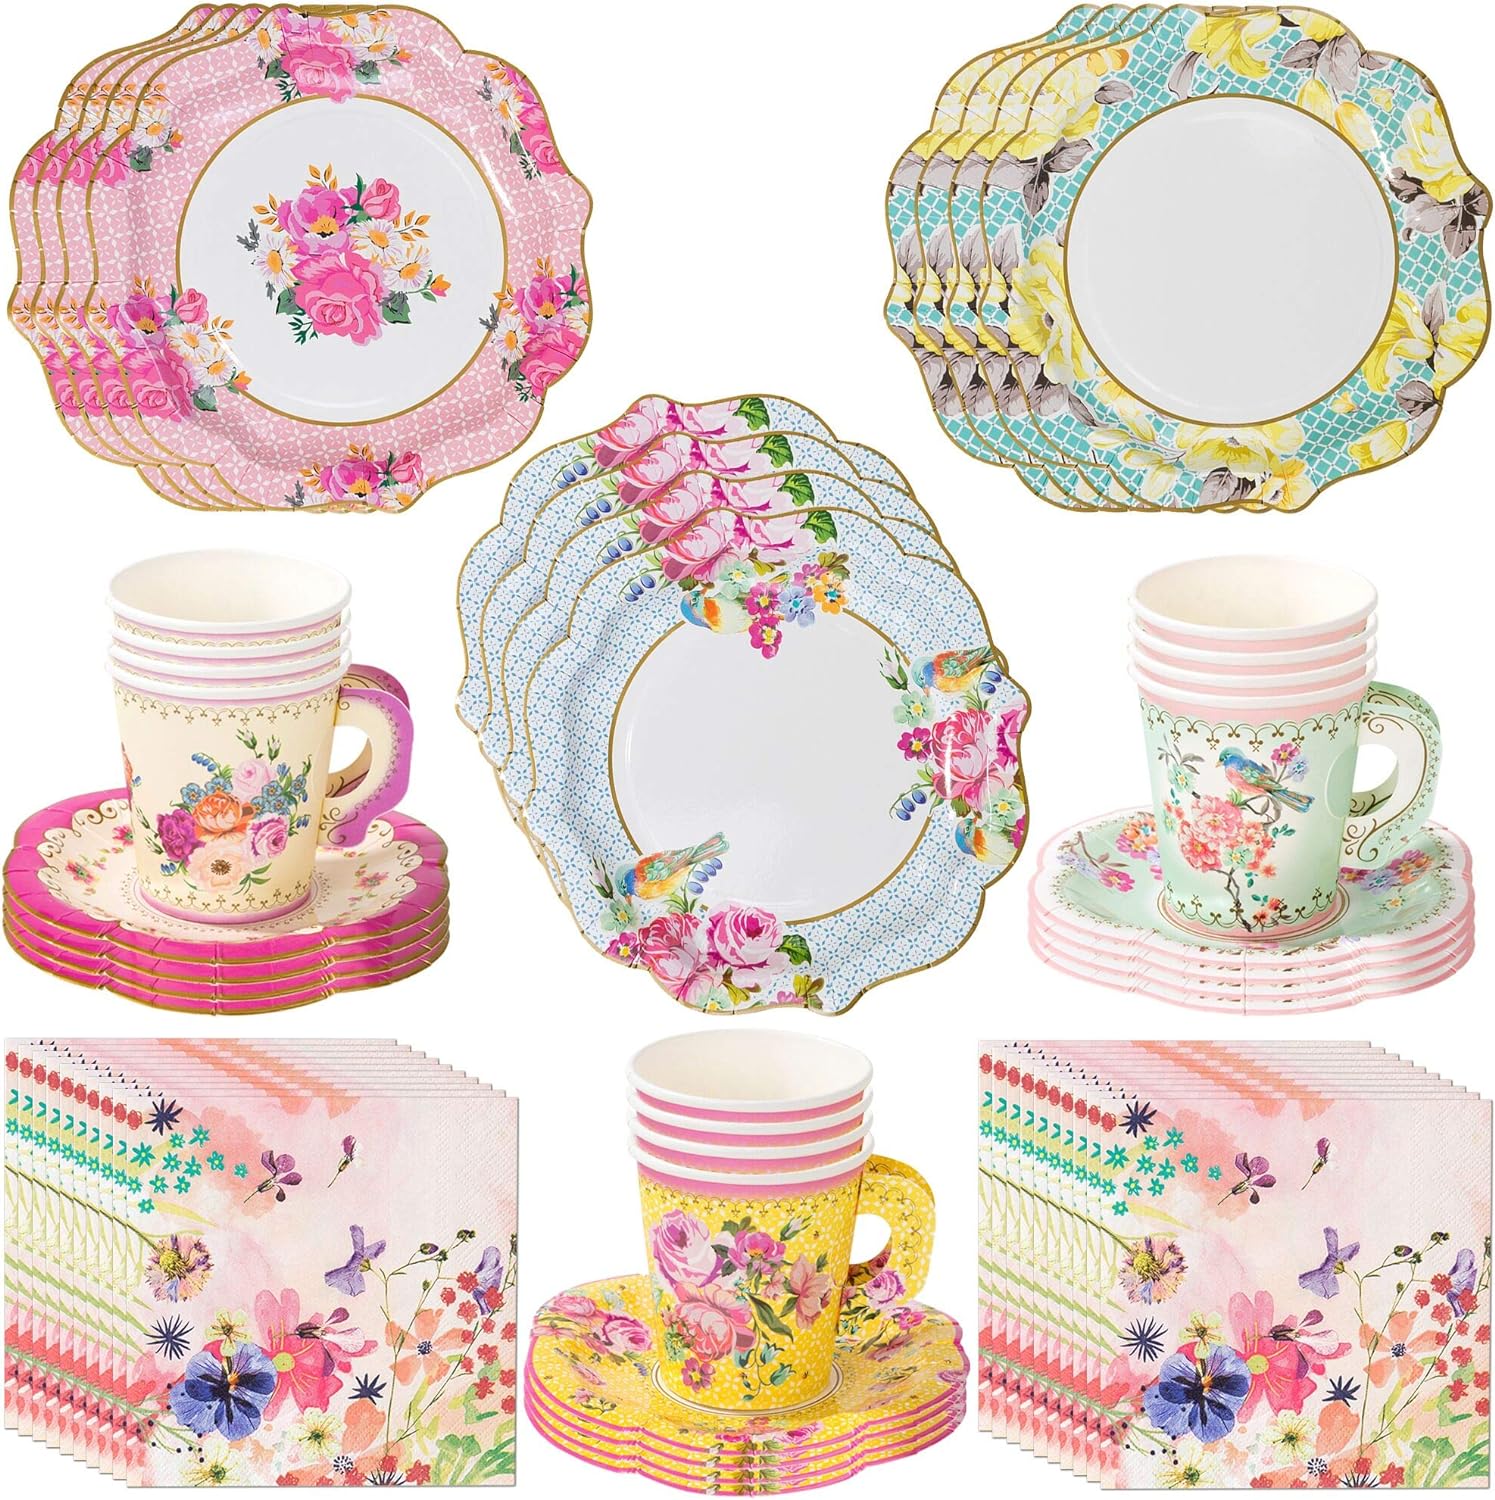 Party Plates Paper Plates Tea Party Plates Birthday Party Plates Wedding Hen Party Girls Baby Shower 12 Pink Plates Birthday Party